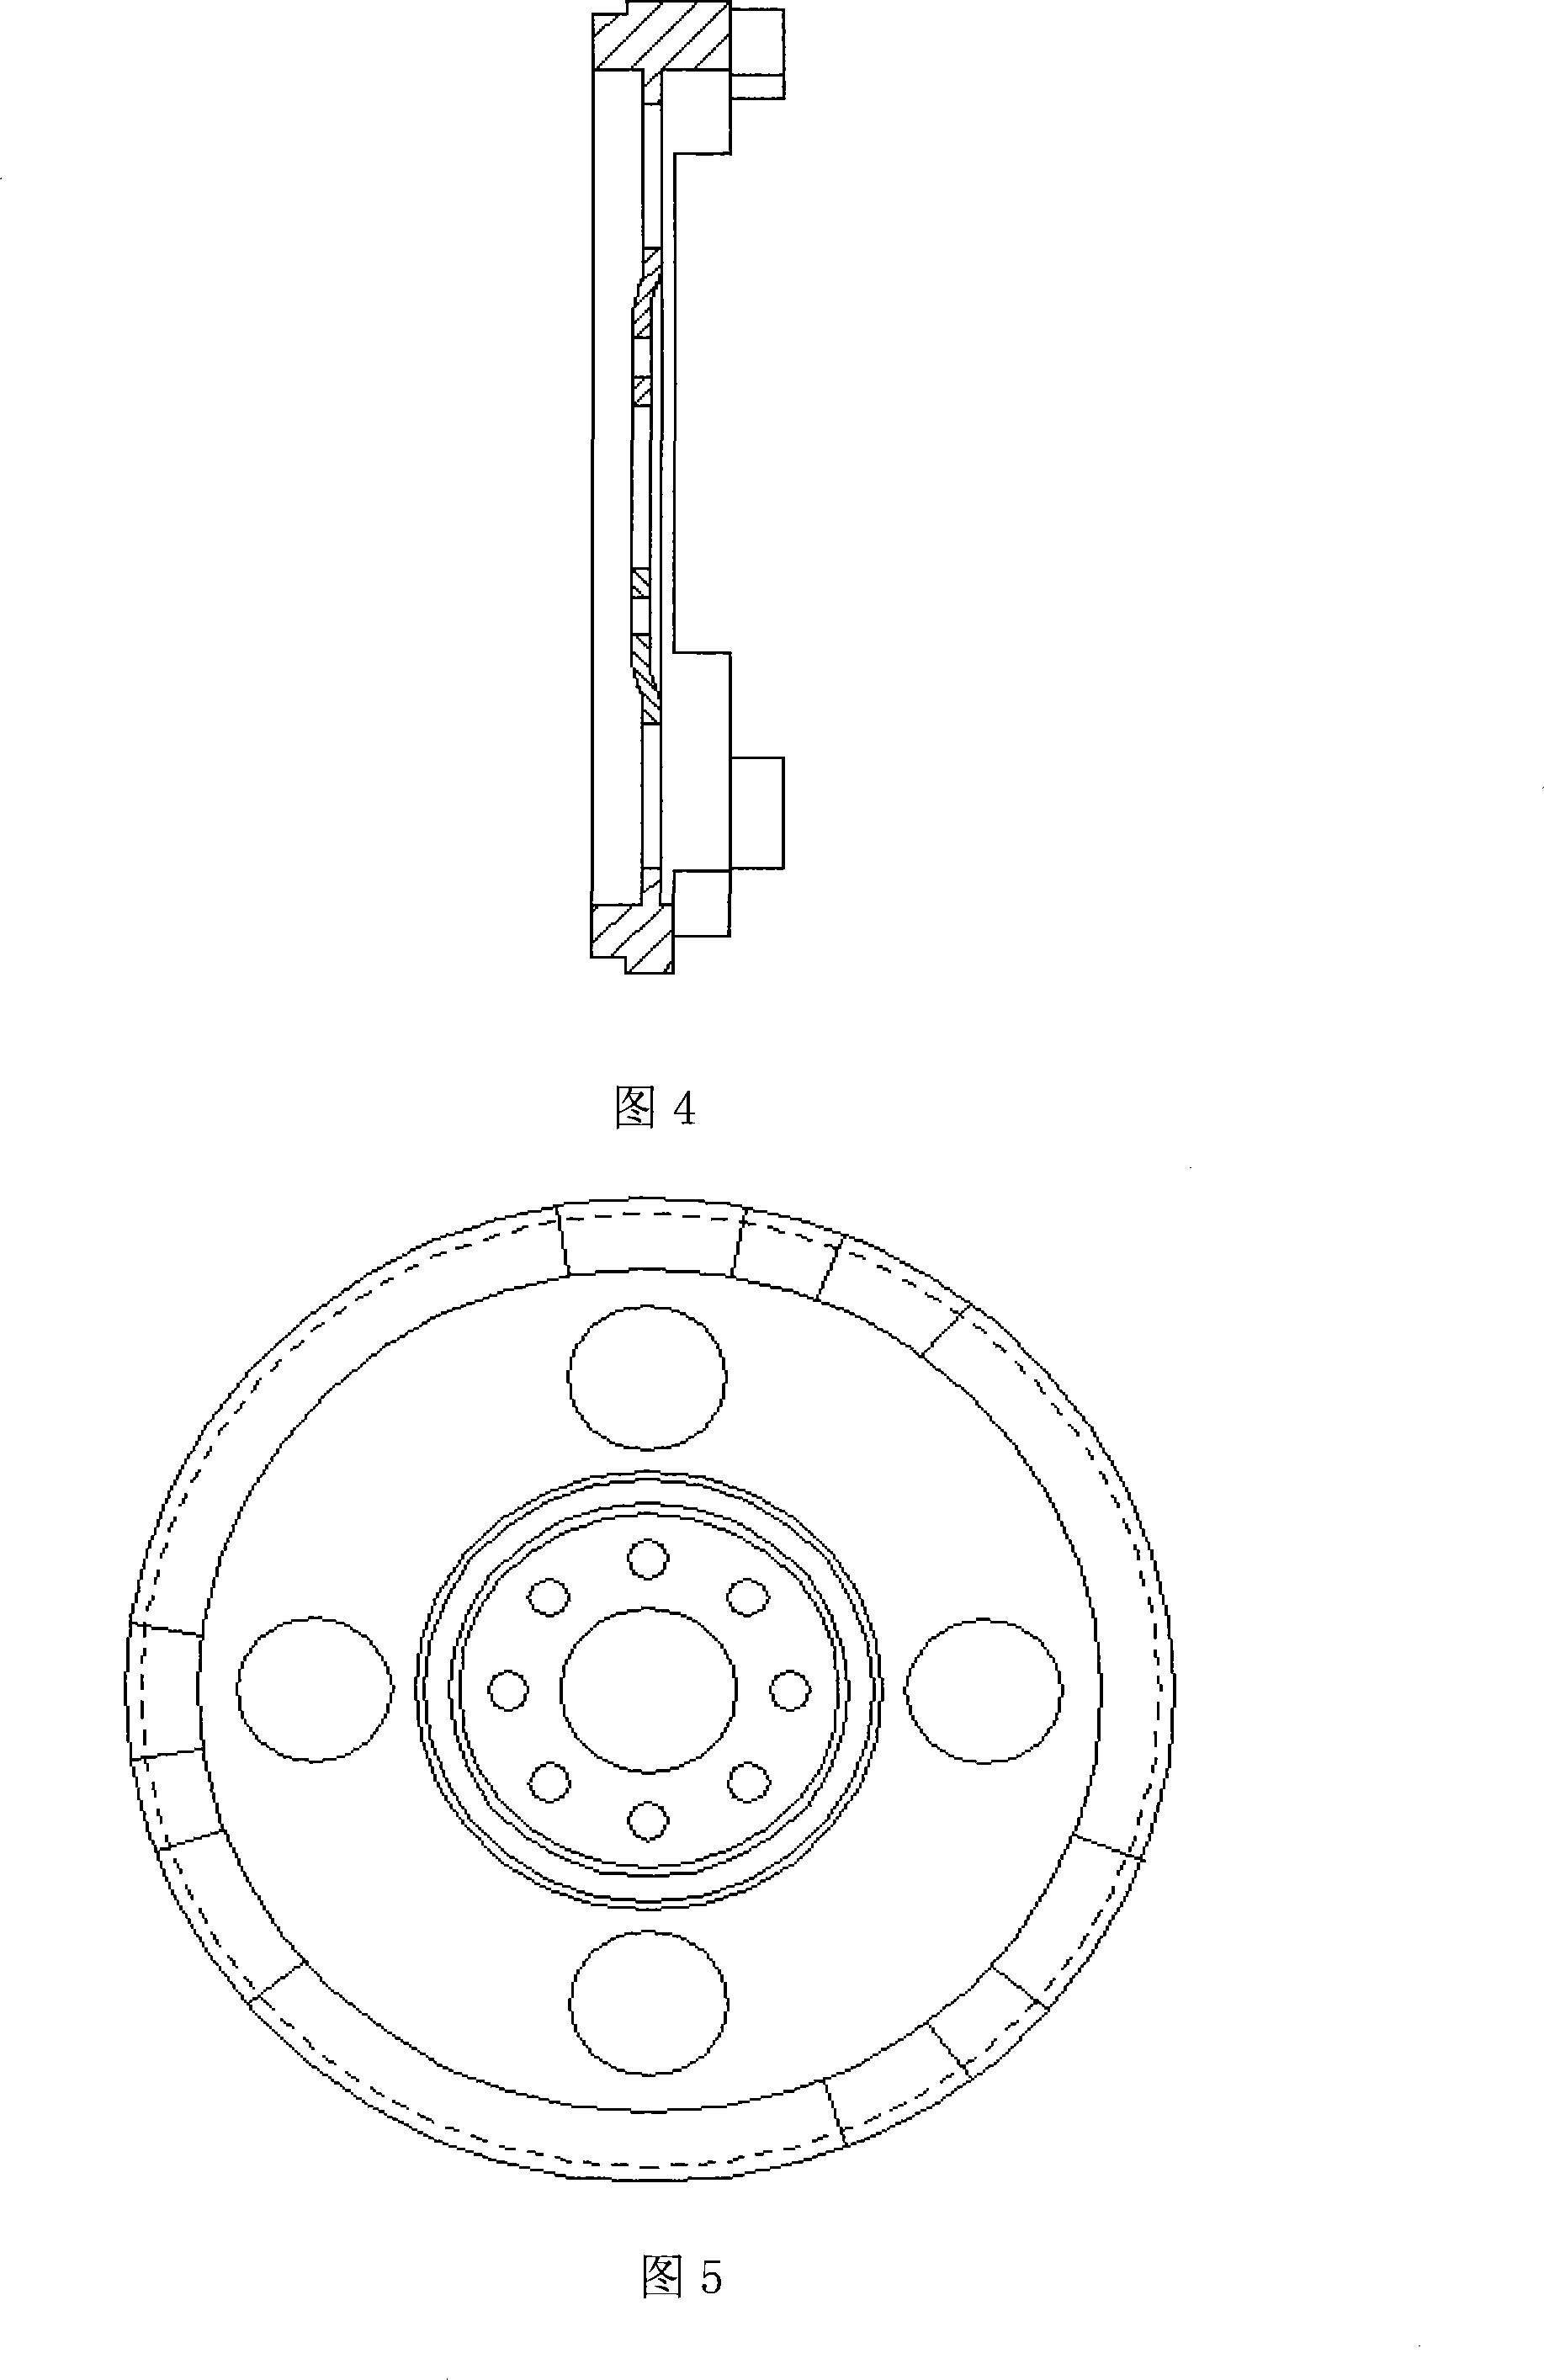 Two flywheels for dry type dual clutch